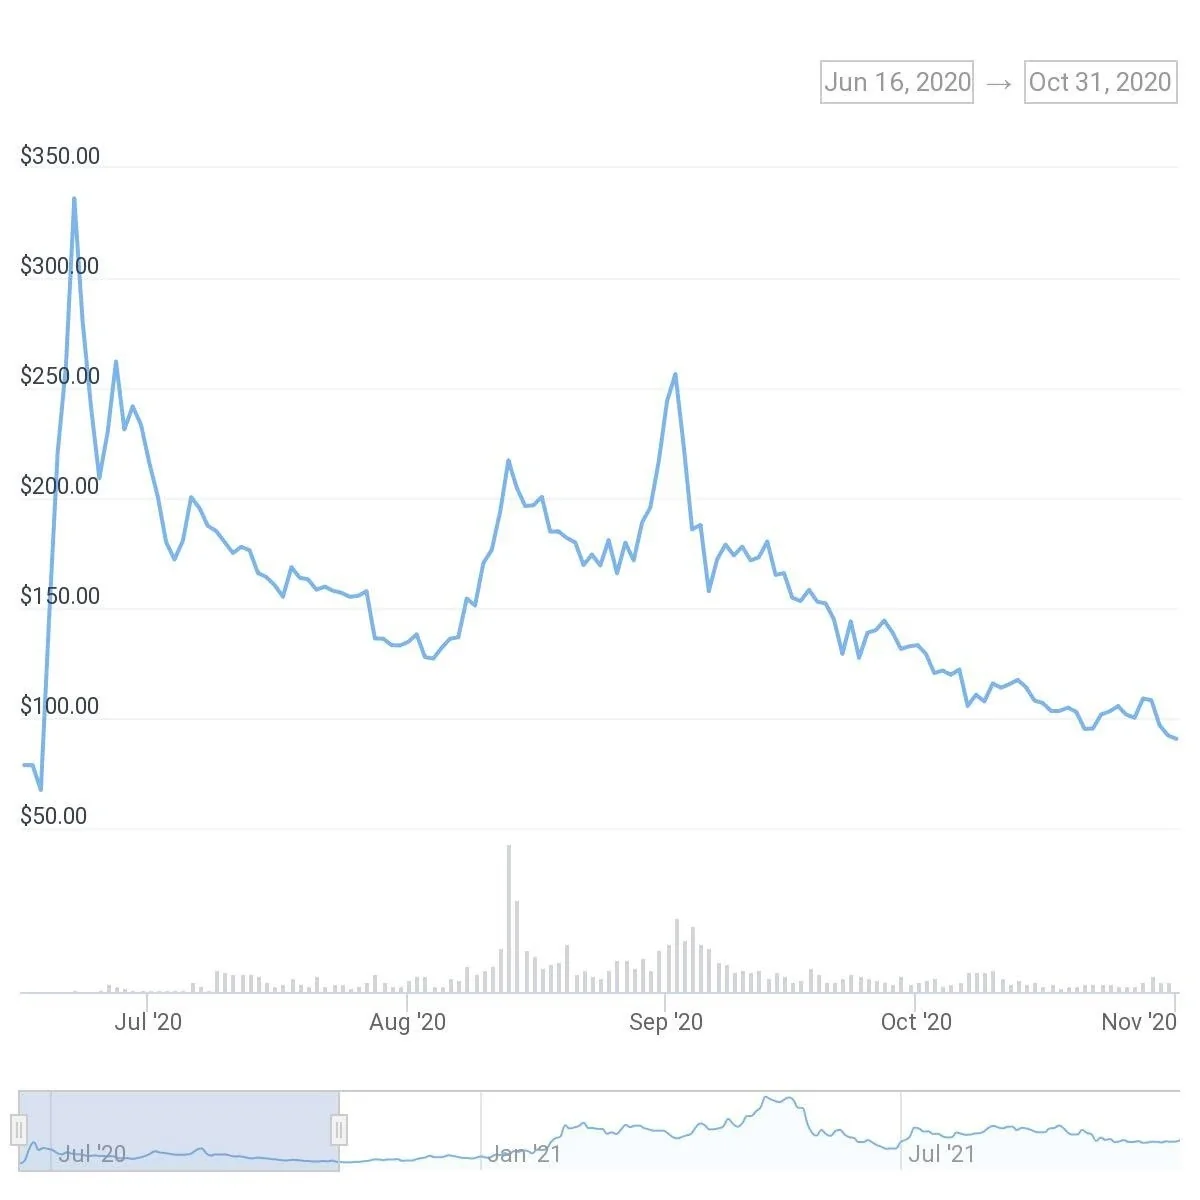 Price of COMP from launch in June 2020 to November 2020. Source: CoinGecko